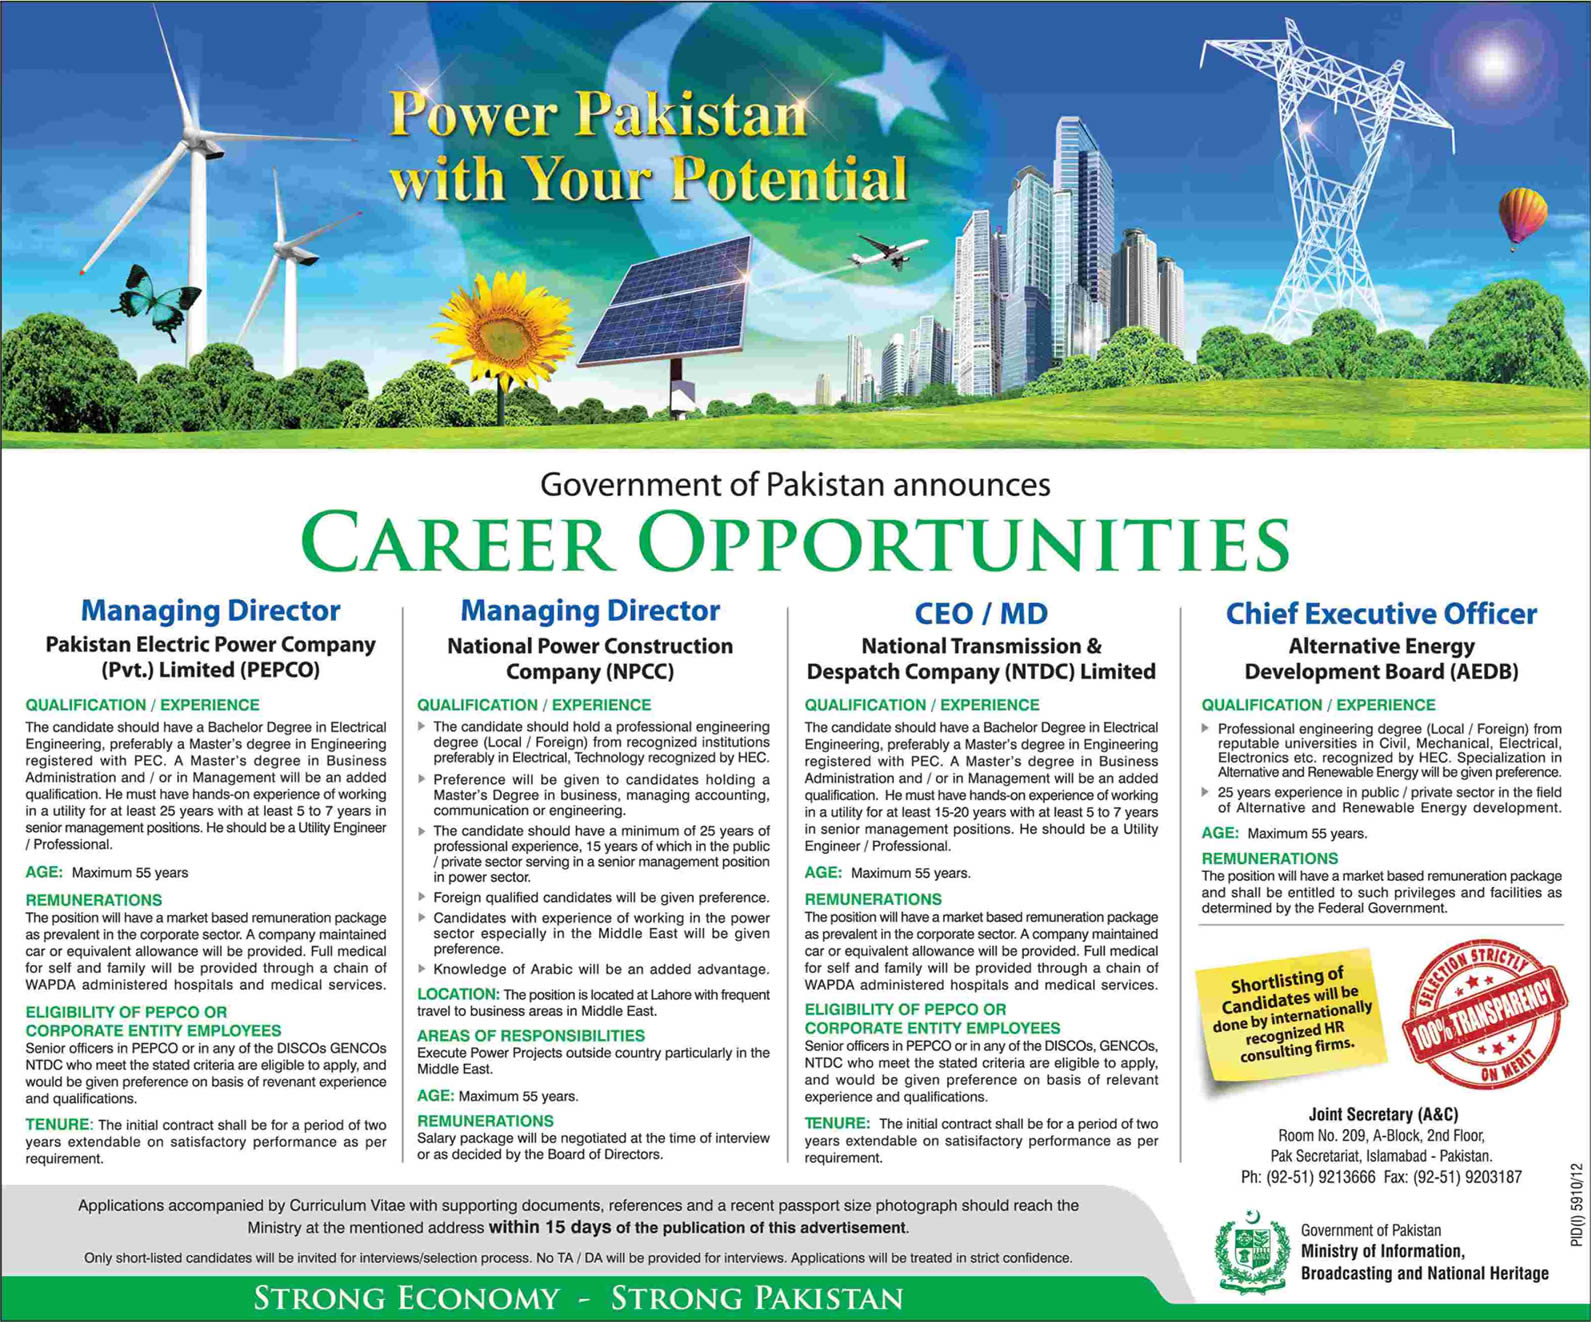 Government of Pakistan Jobs 2013 for CEO - AEDB, CEO / MD - NTDC, MD - NPCC & MD - PEPCO